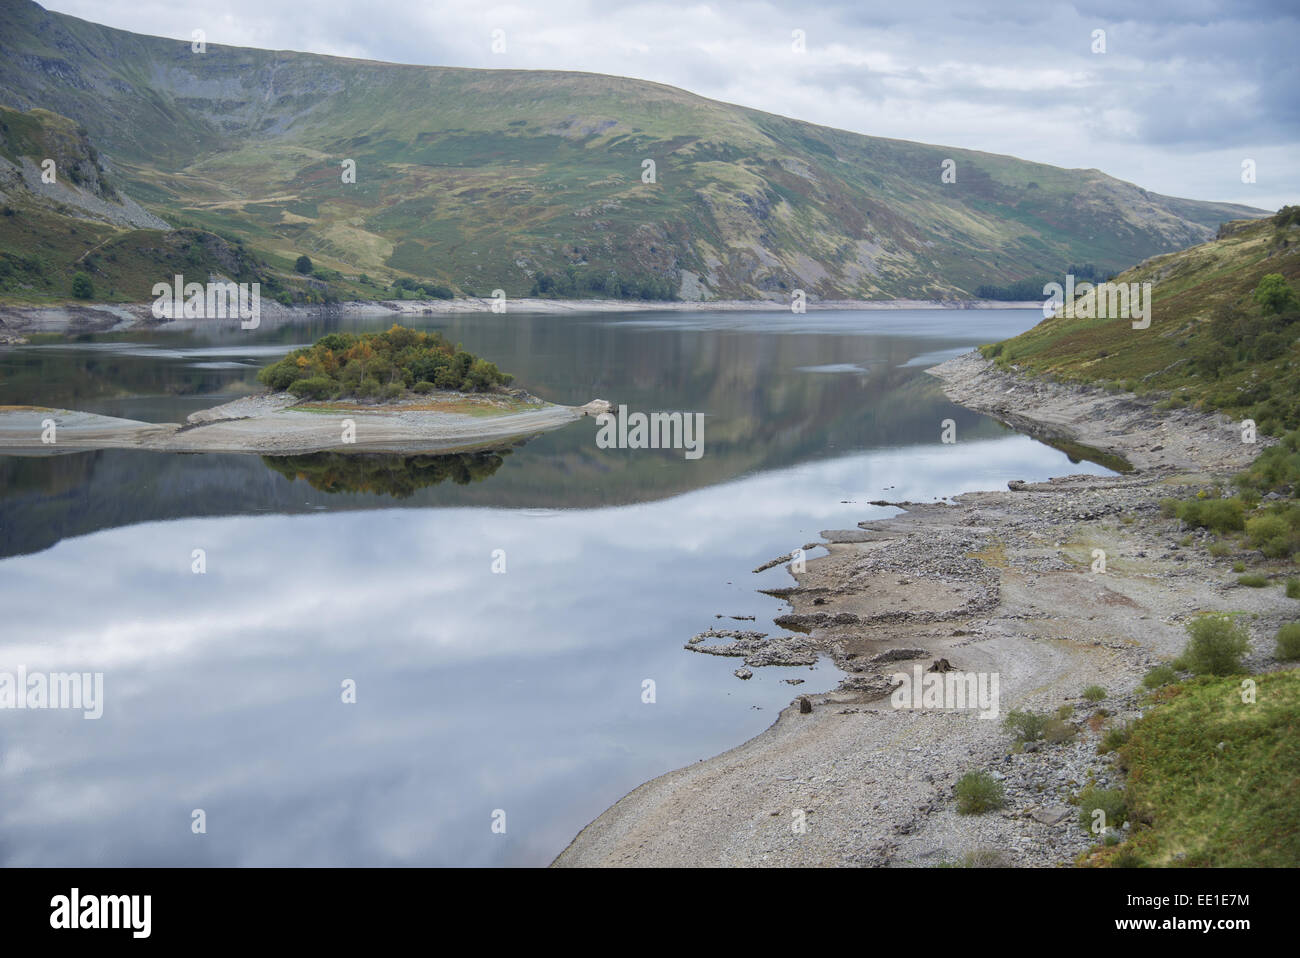 View of upland reservoir with low water level and remains of submerged village exposed after dry summer, Mardale Green, Haweswater Reservoir, Mardale Valley, Lake District, Cumbria, England, September Stock Photo